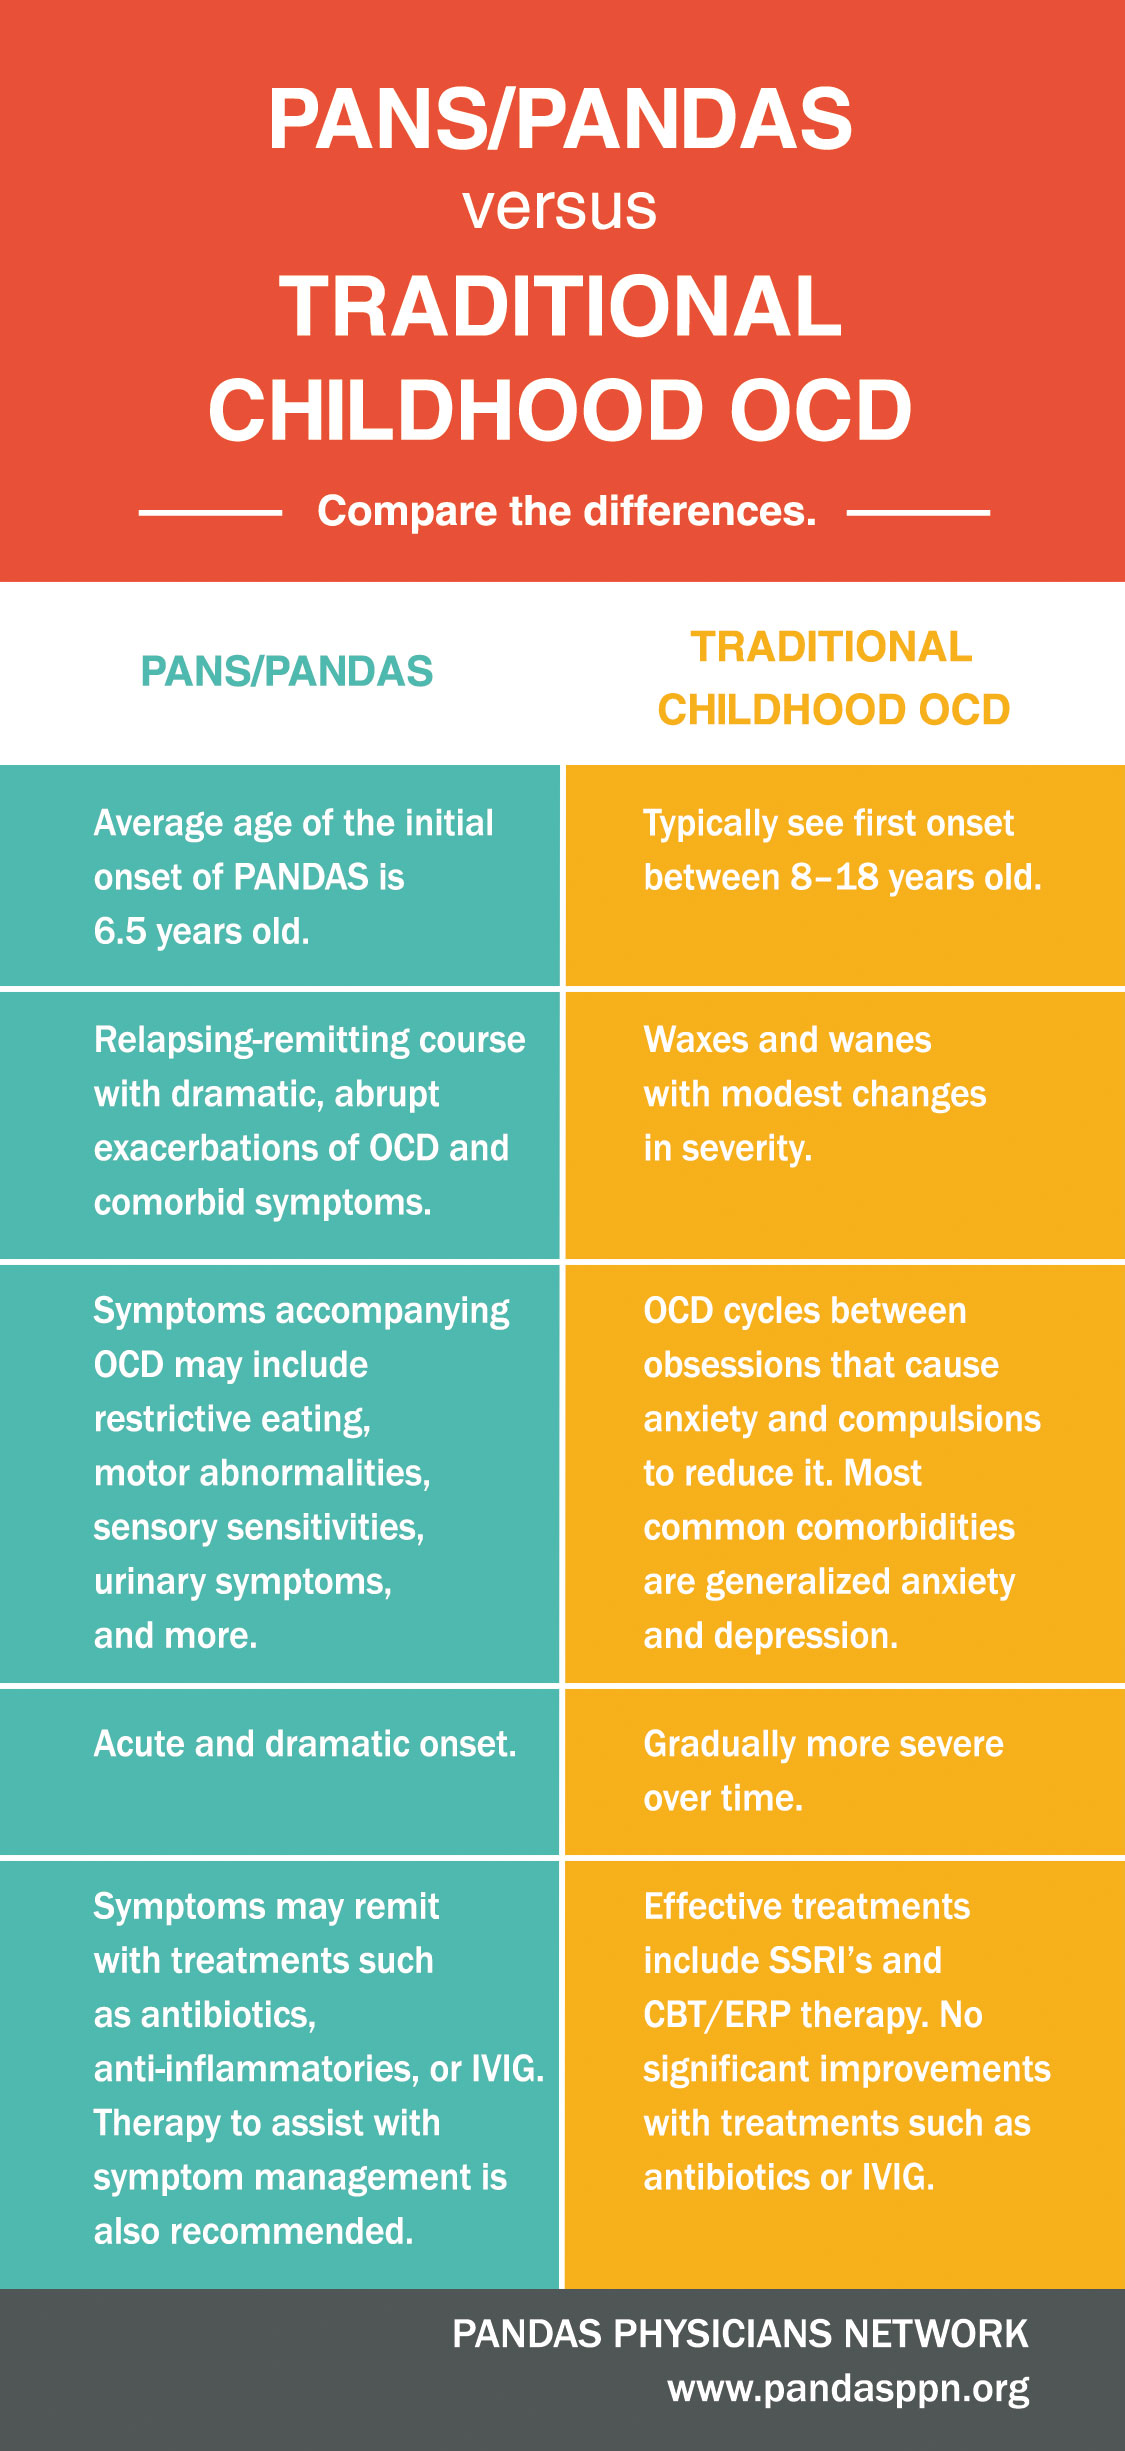 PANS/PANDAS compared to OCD